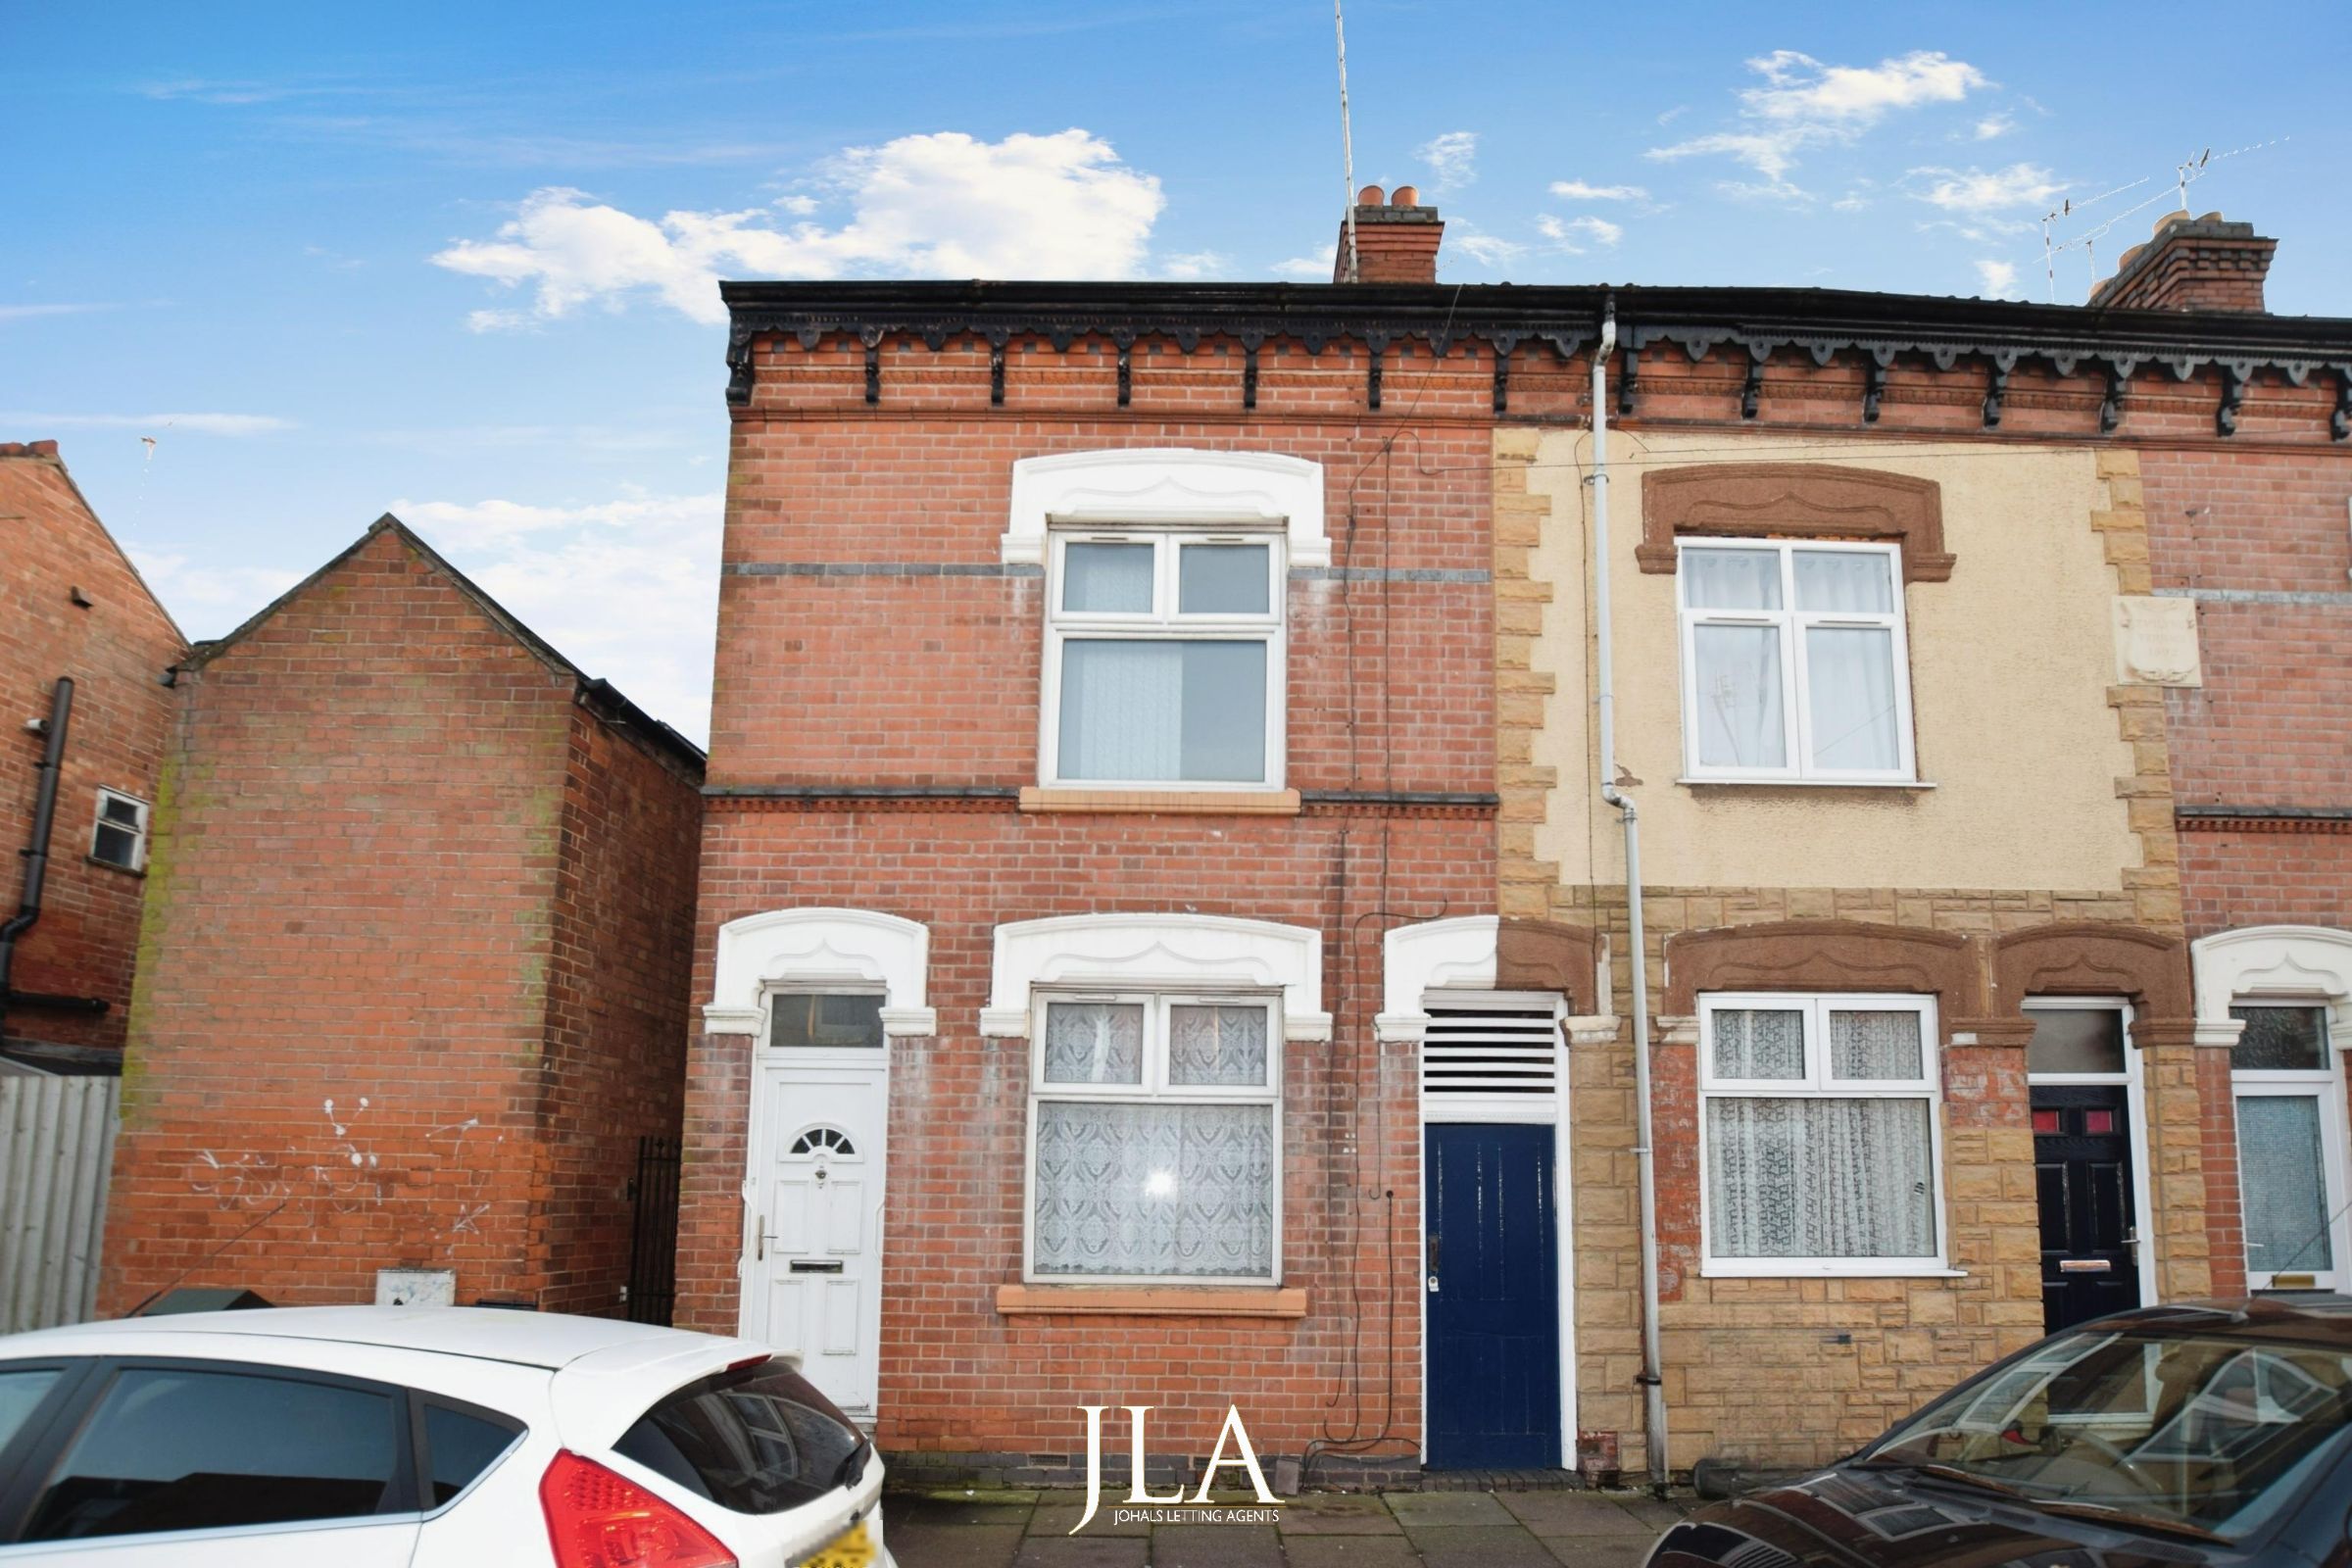 3 bed terraced house to rent in Jarrom Street, Leicester, LE2 